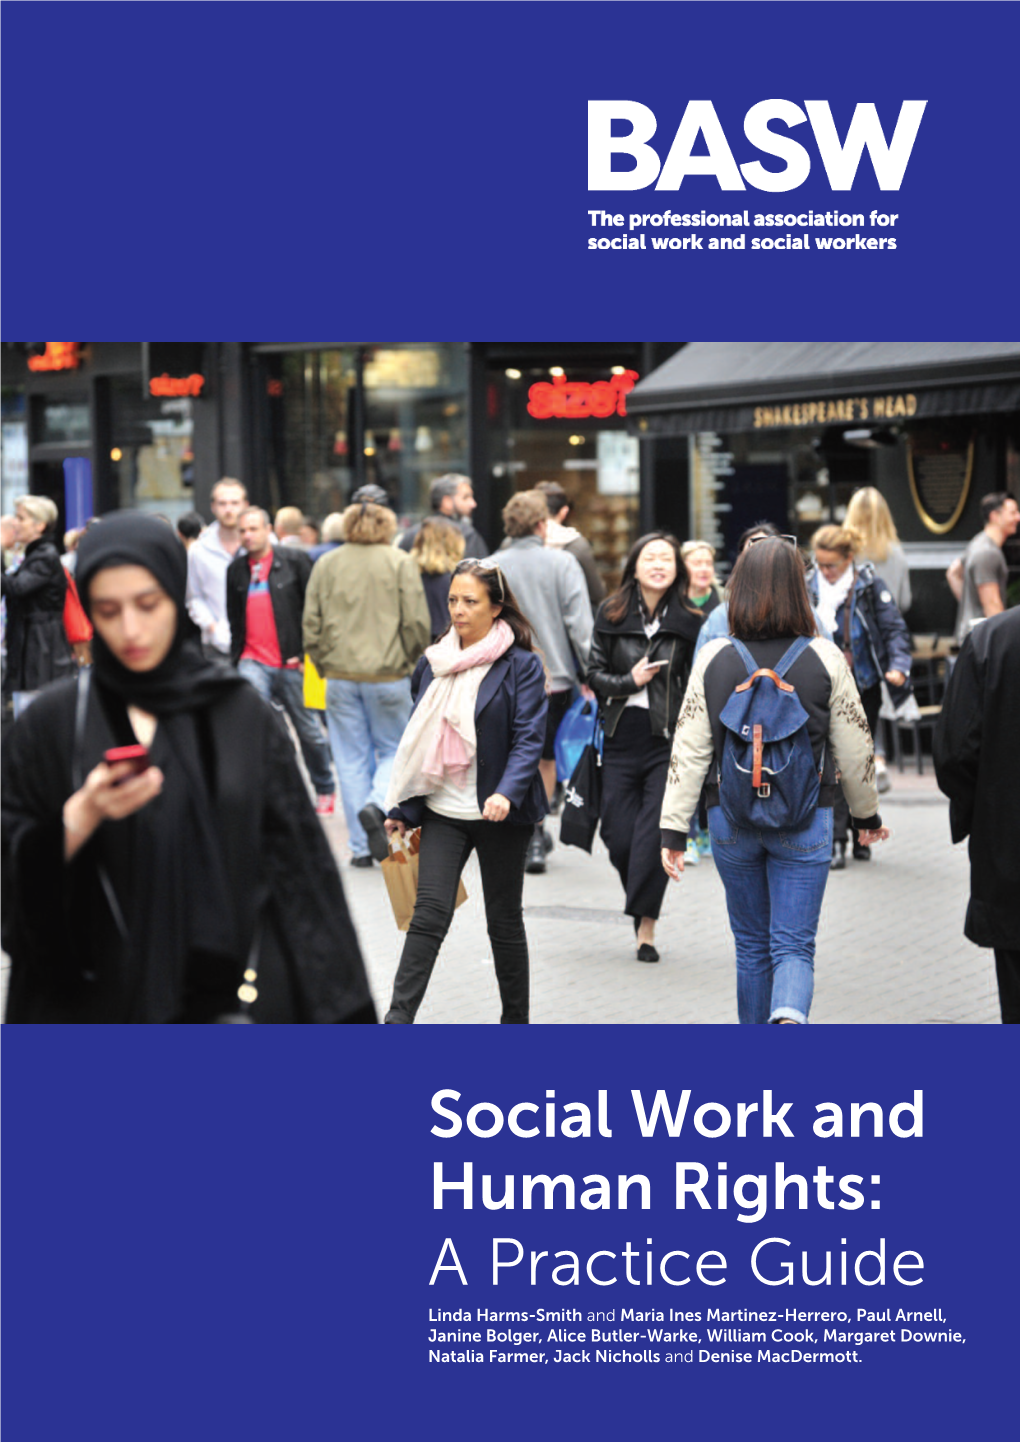 Social Work and Human Rights: a Practice Guide